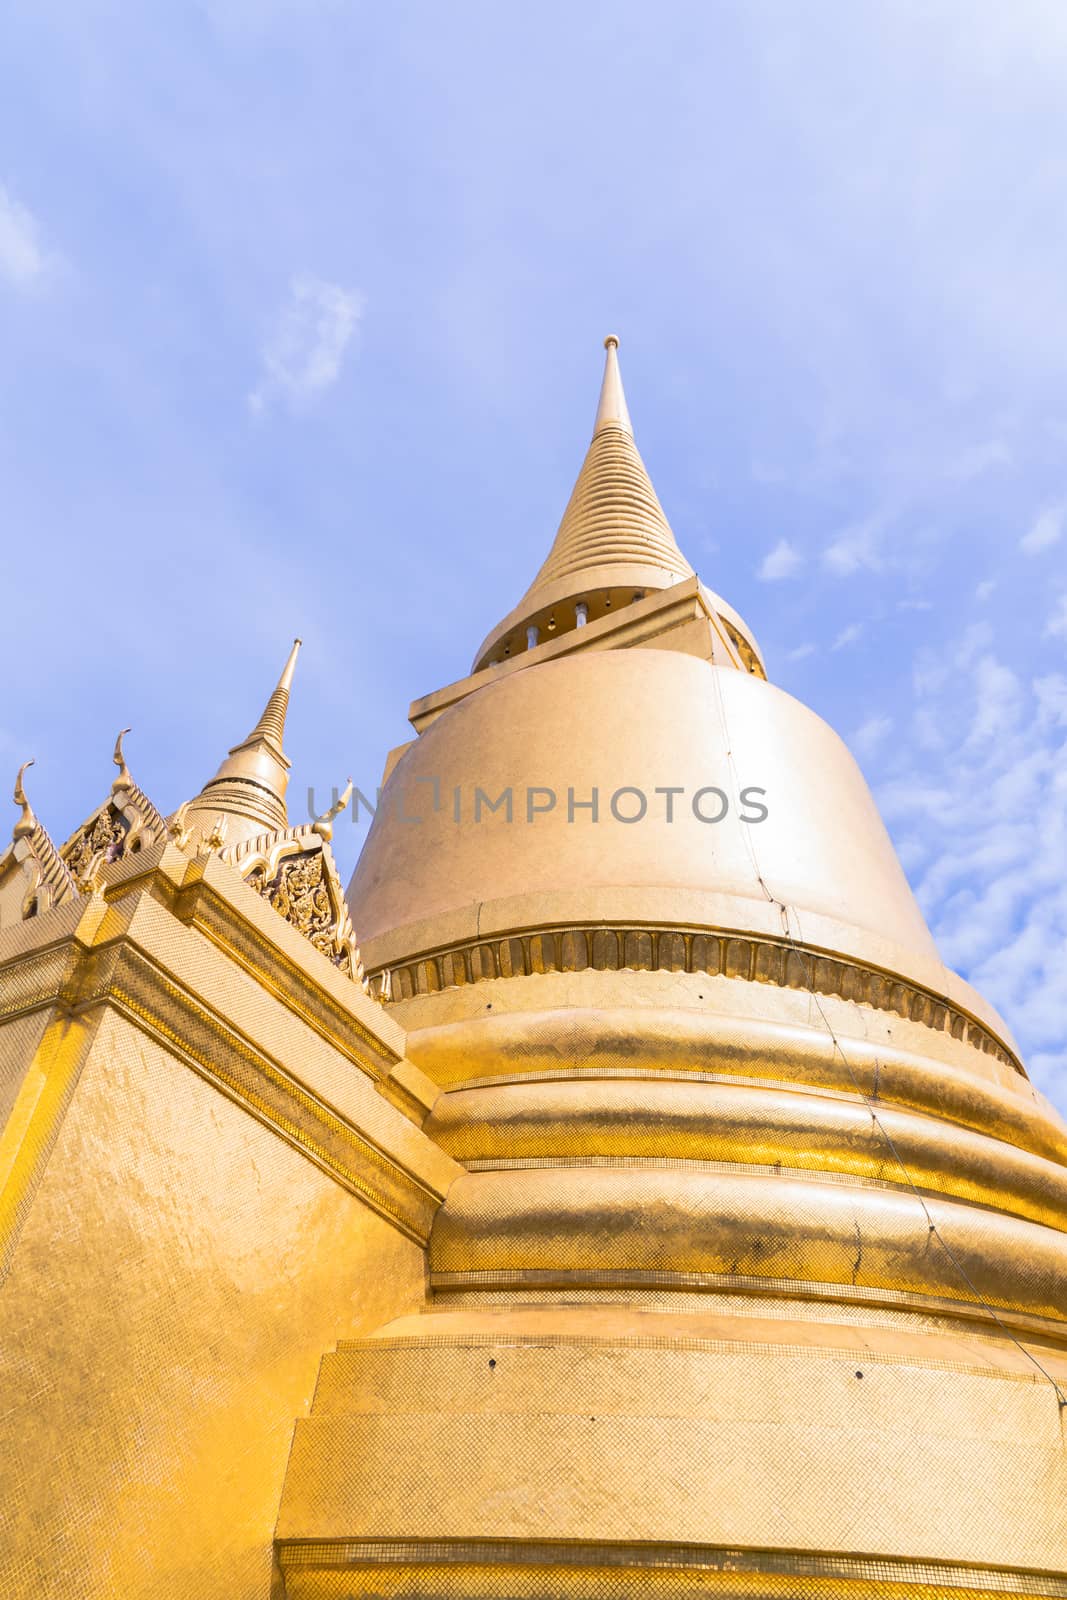 The Temple of the Emerald Buddha or  Wat Phra Kaew is famous place for tourists